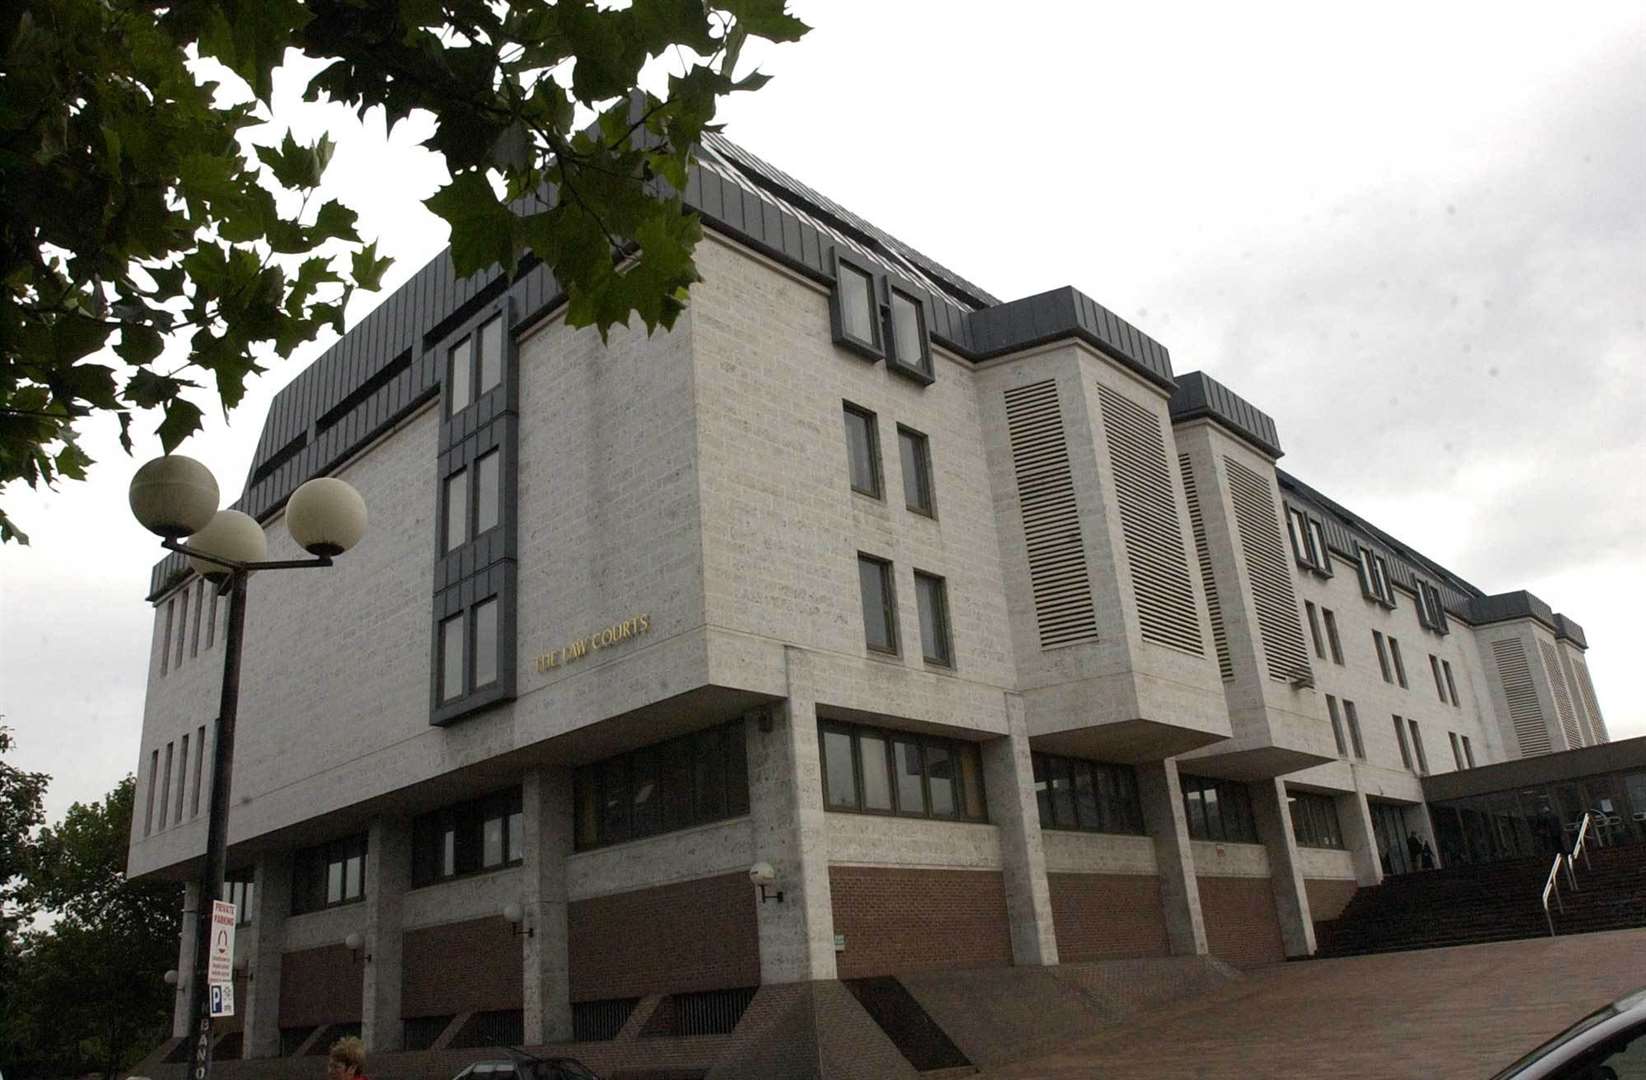 They were sentenced at Maidstone Crown Court